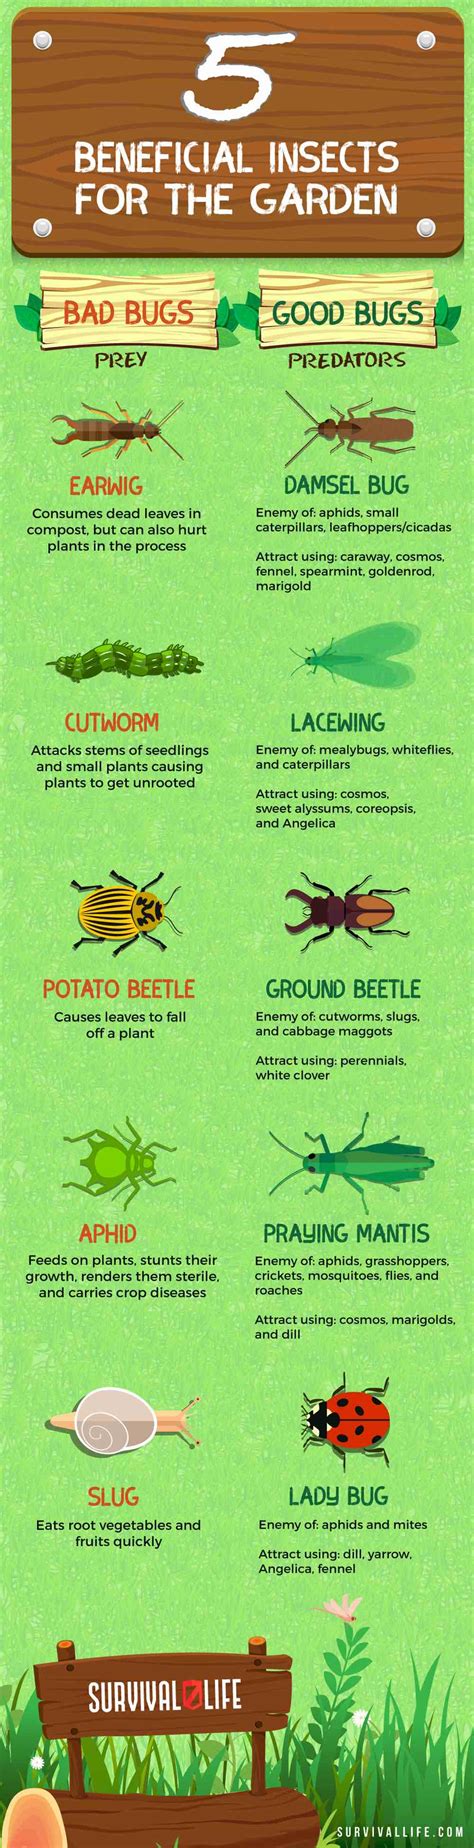 Beneficial Insects For The Garden Good Bugs Vs Bad Bugs